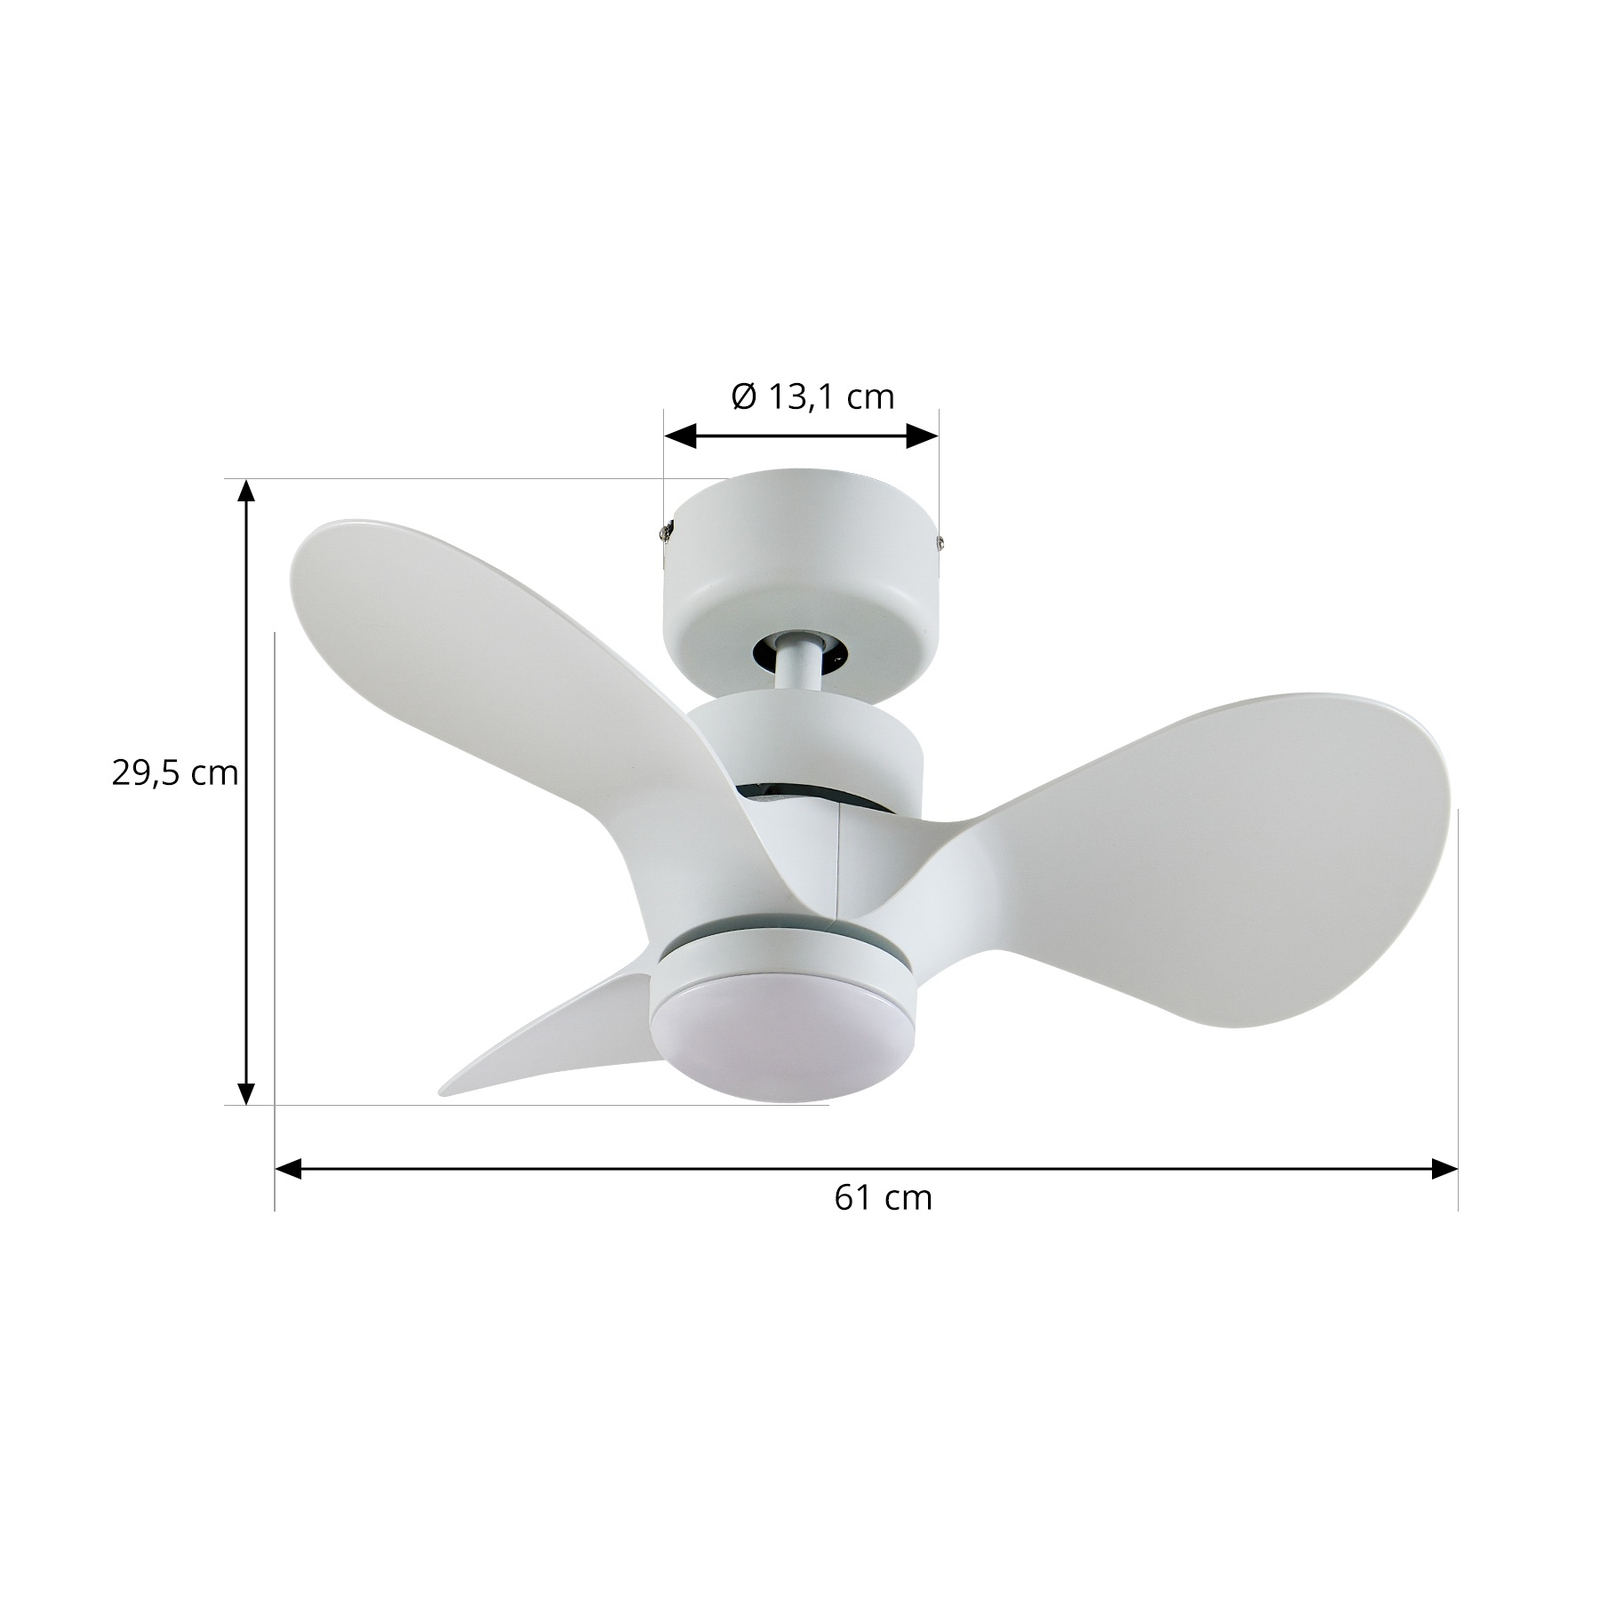 Lindby LED ceiling fan Enon, white, DC motor, quiet